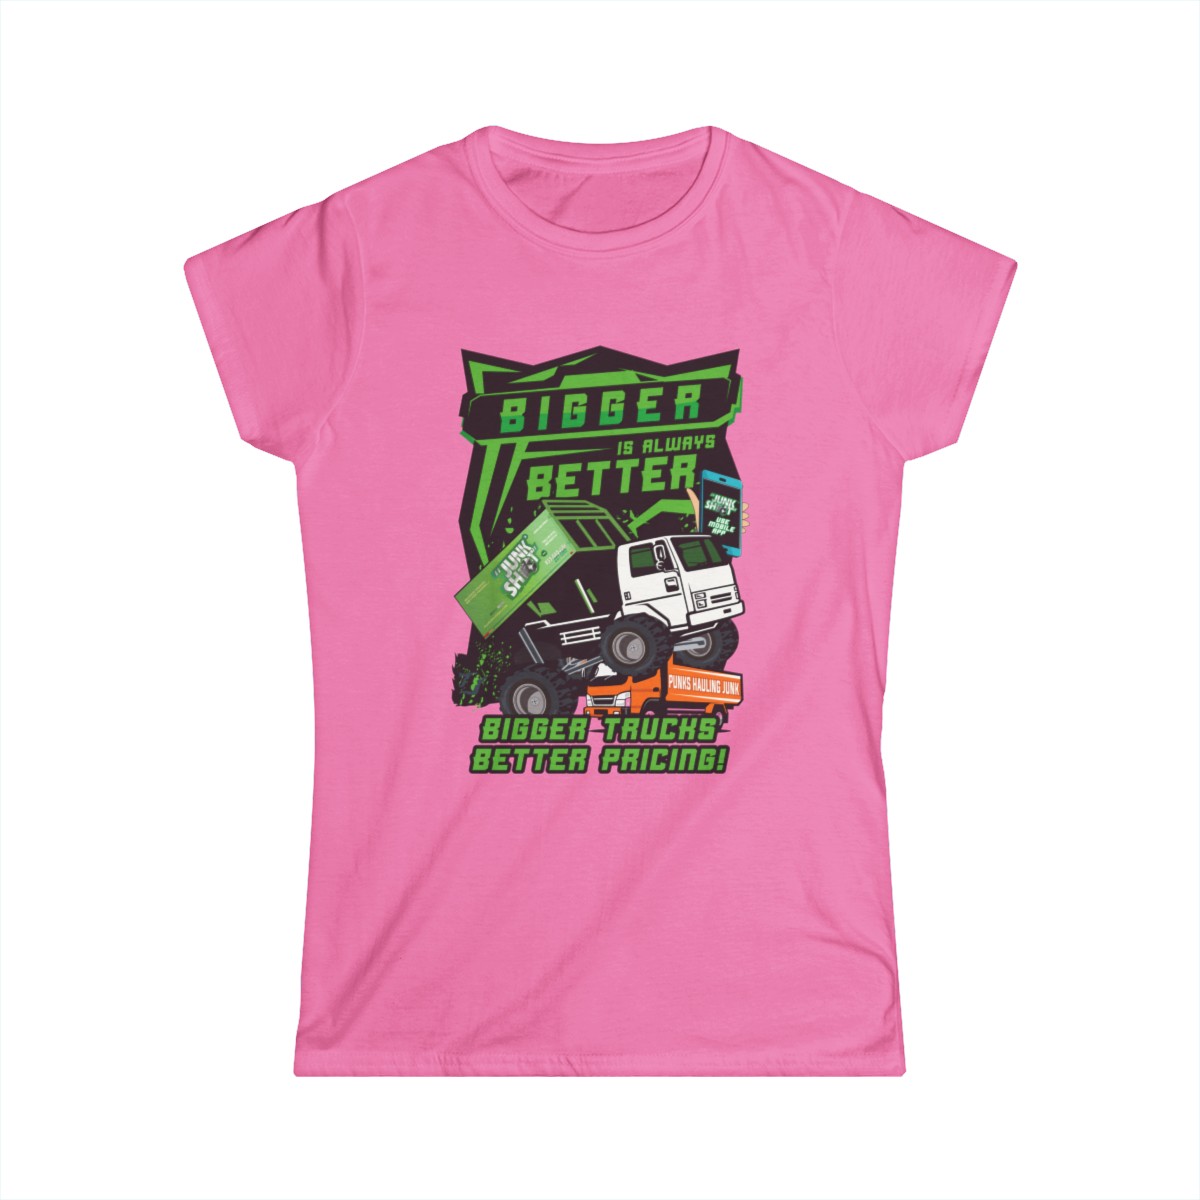 "BIGGER IS ALWAYS BETTER" Women's Softstyle Tee product main image